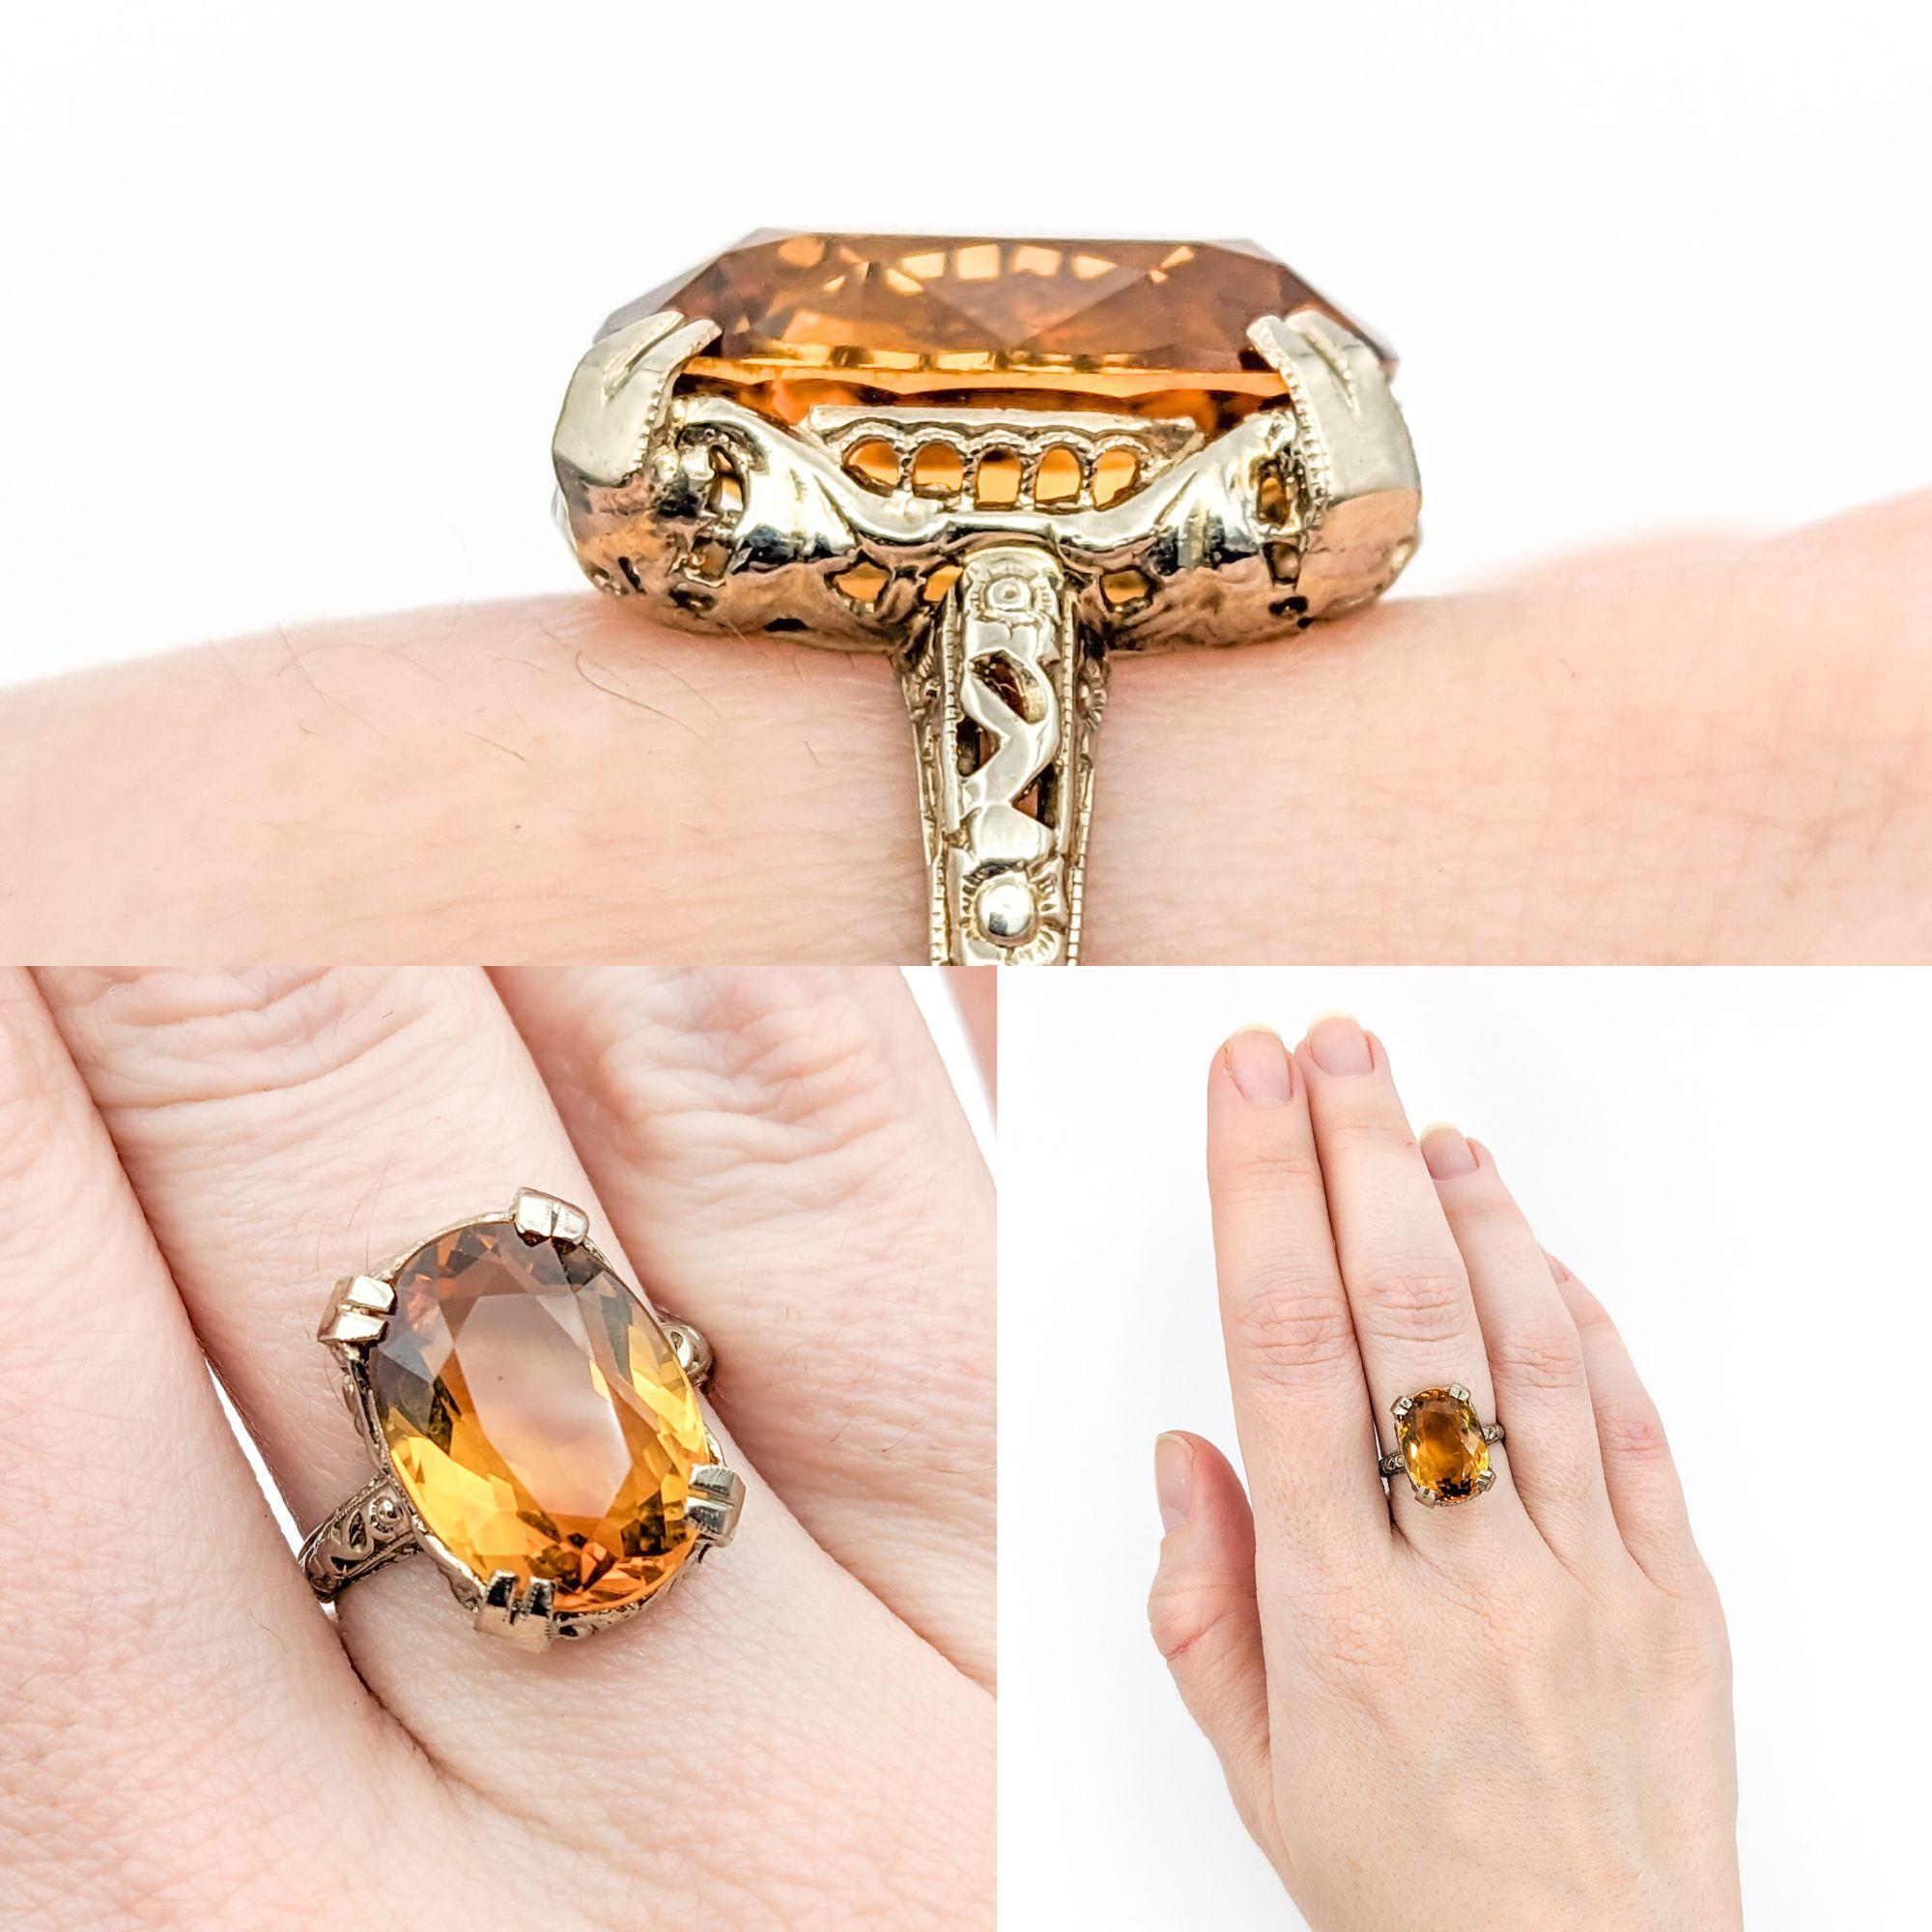 8ct Oval Citrine Filigree Ring In White Gold In Excellent Condition For Sale In Bloomington, MN